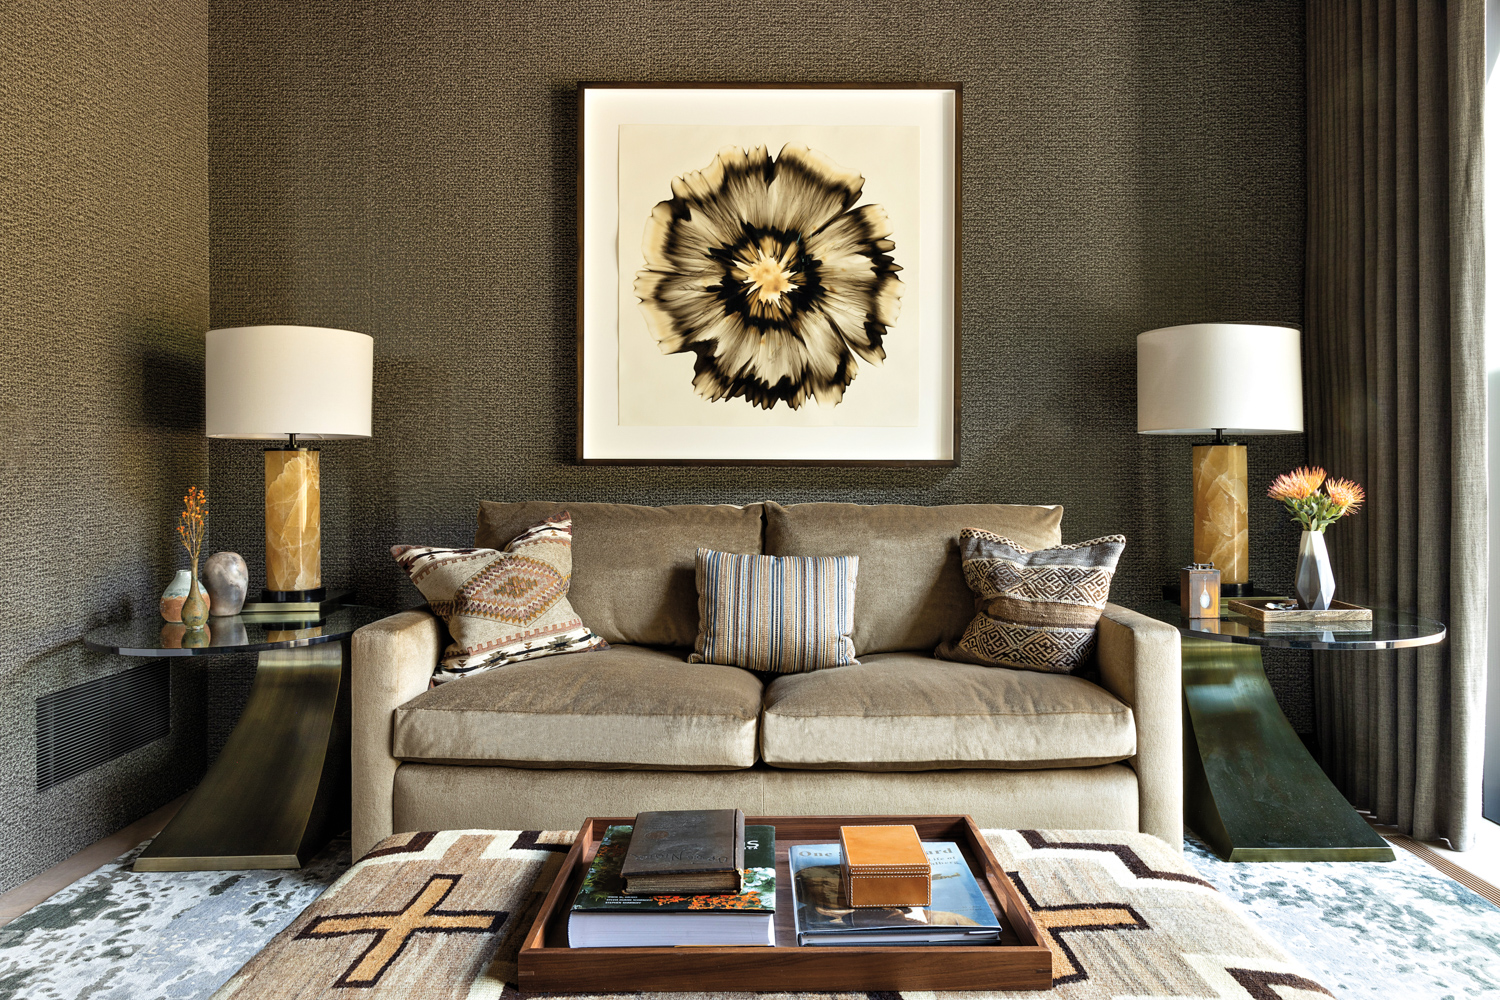 Taupe-colored sofa framed by modern...